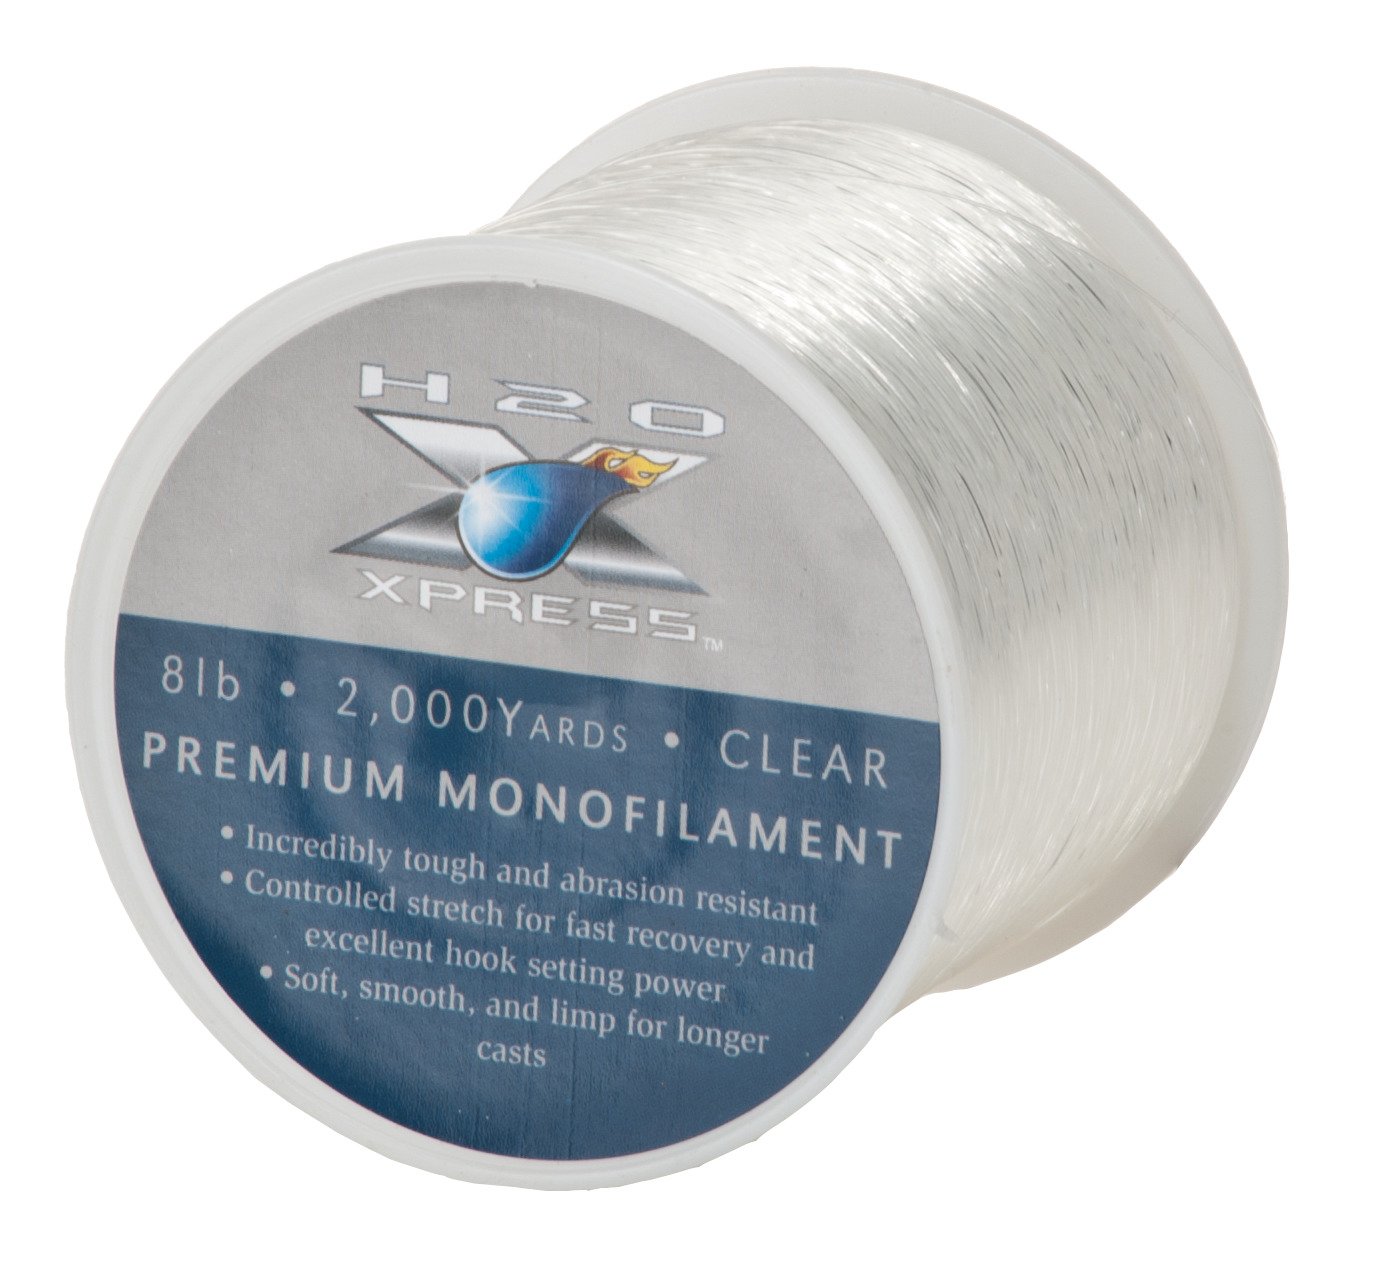 Academy Sports + Outdoors H2O XPRESS 8 lb - 2,000 yd Monofilament